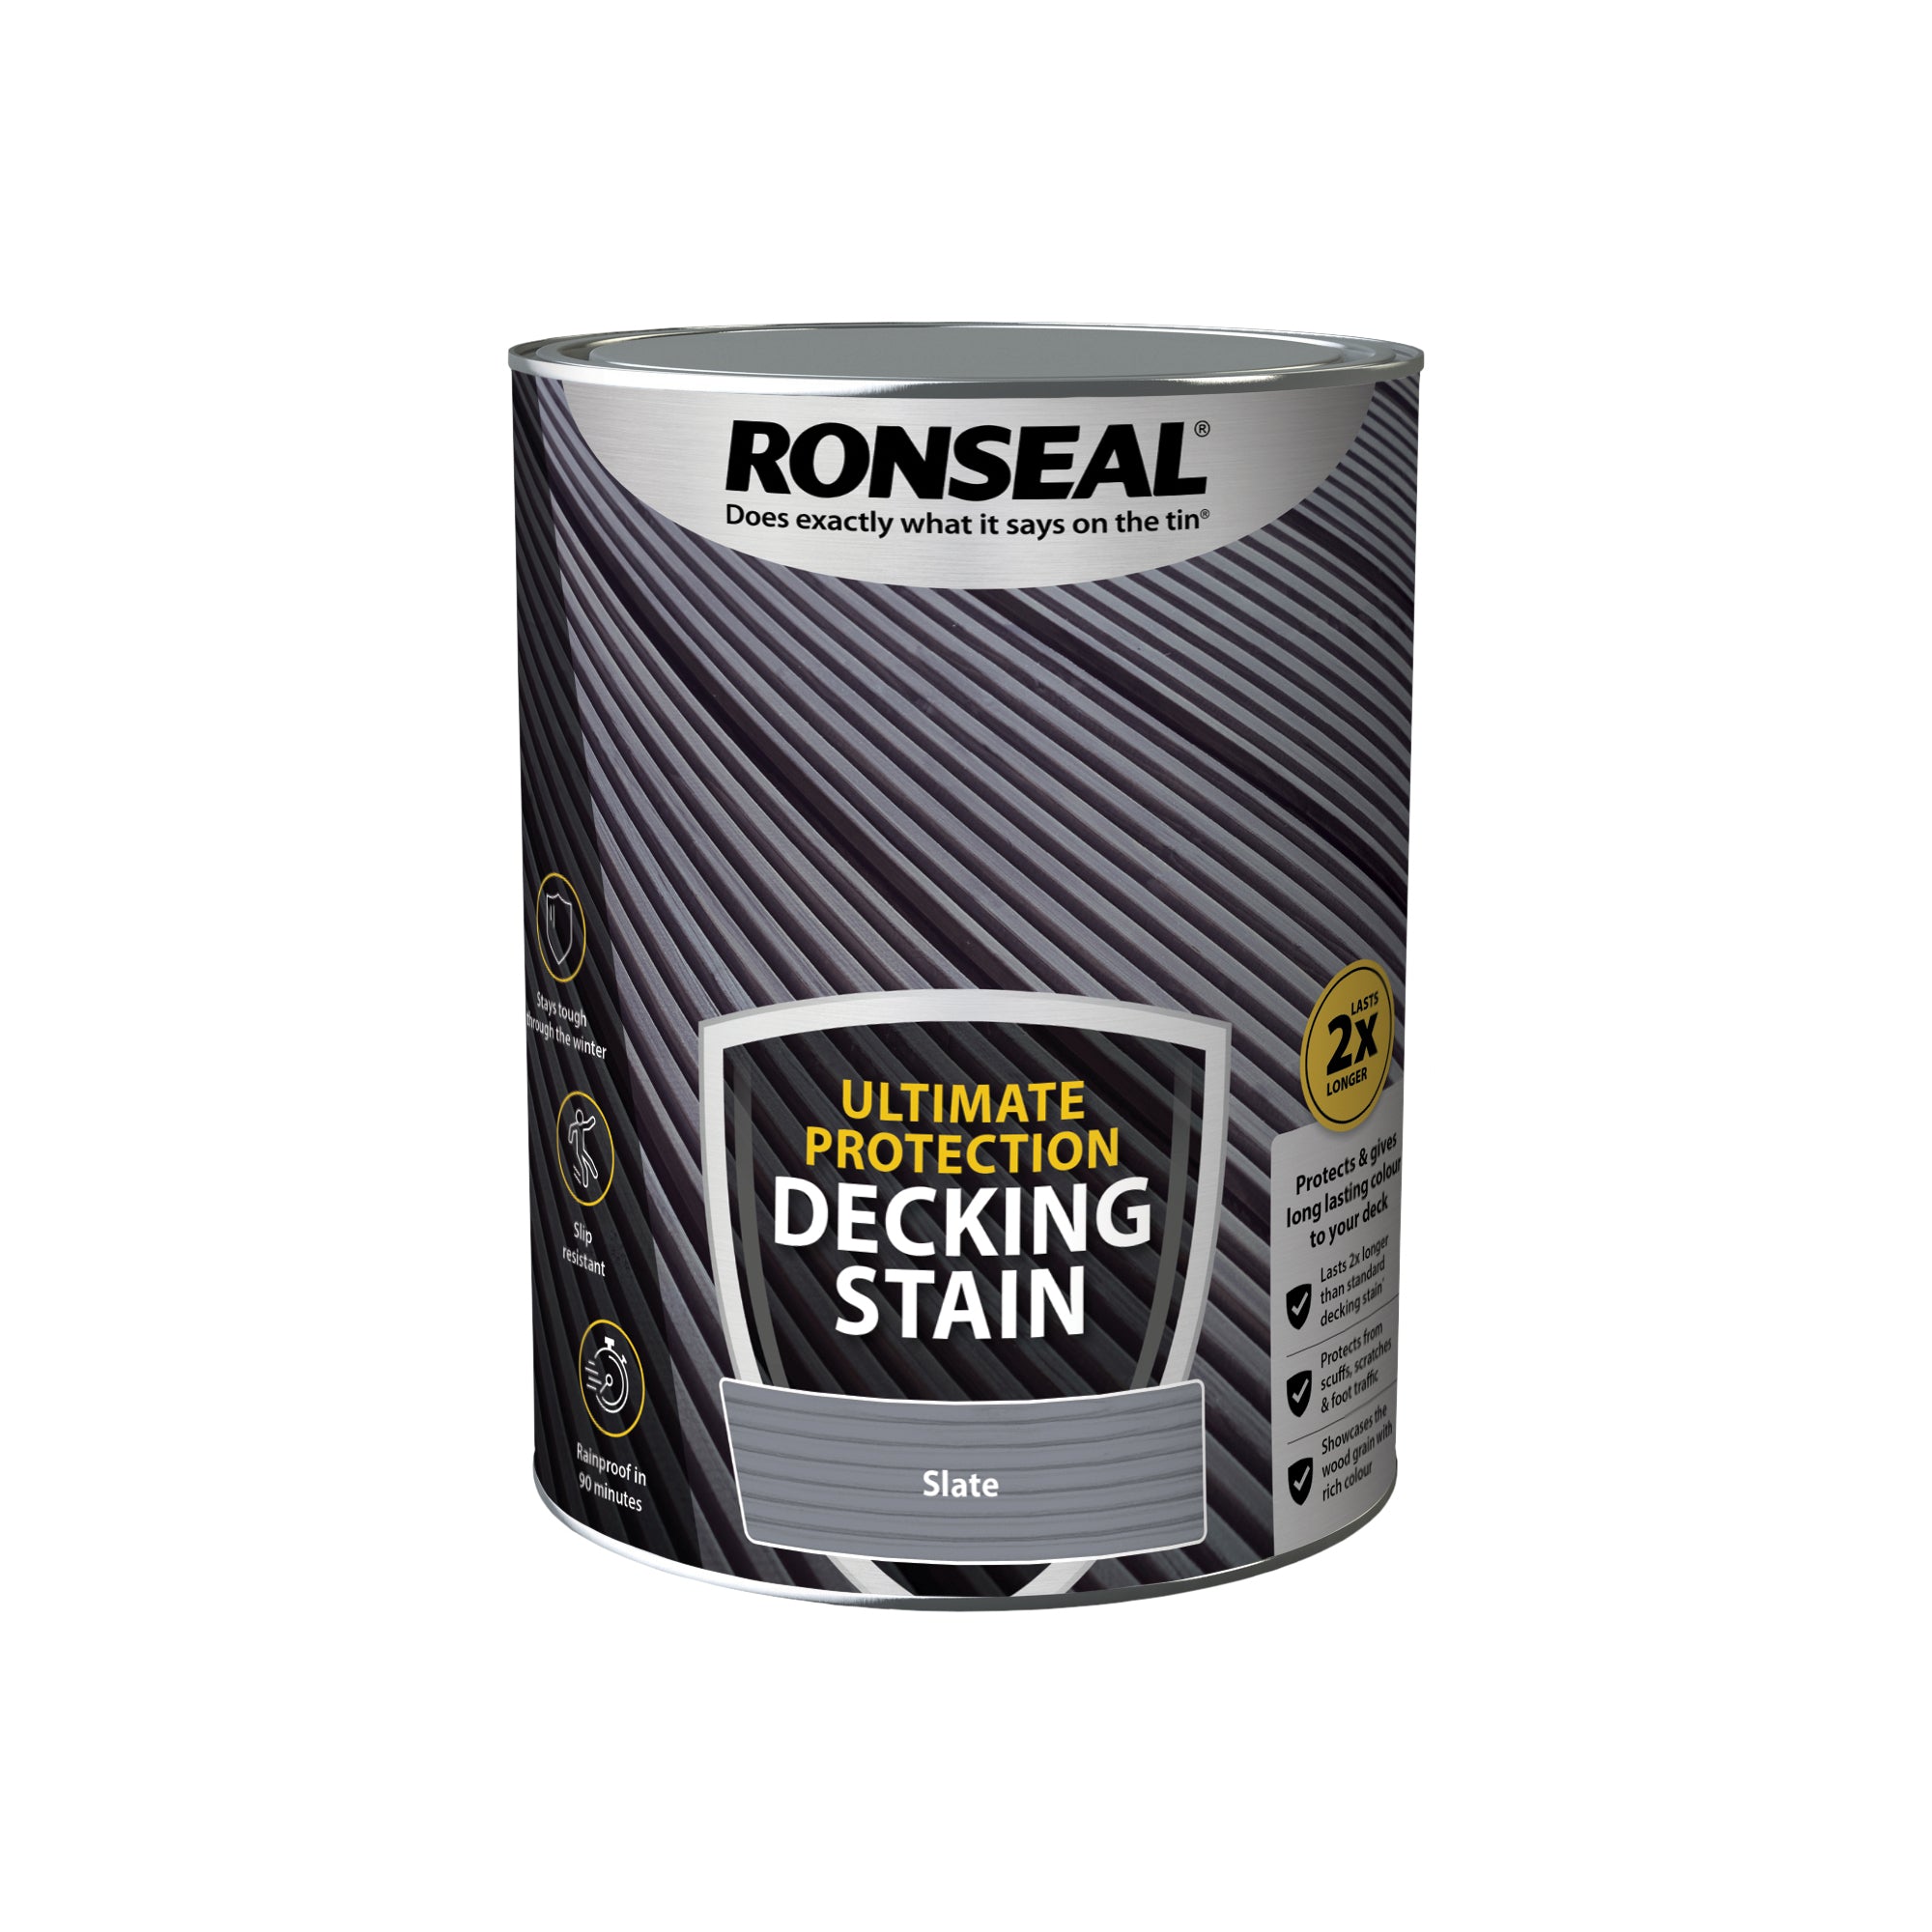 Ronseal-Ultimate-Protection-Decking-Stain-Slate-5L